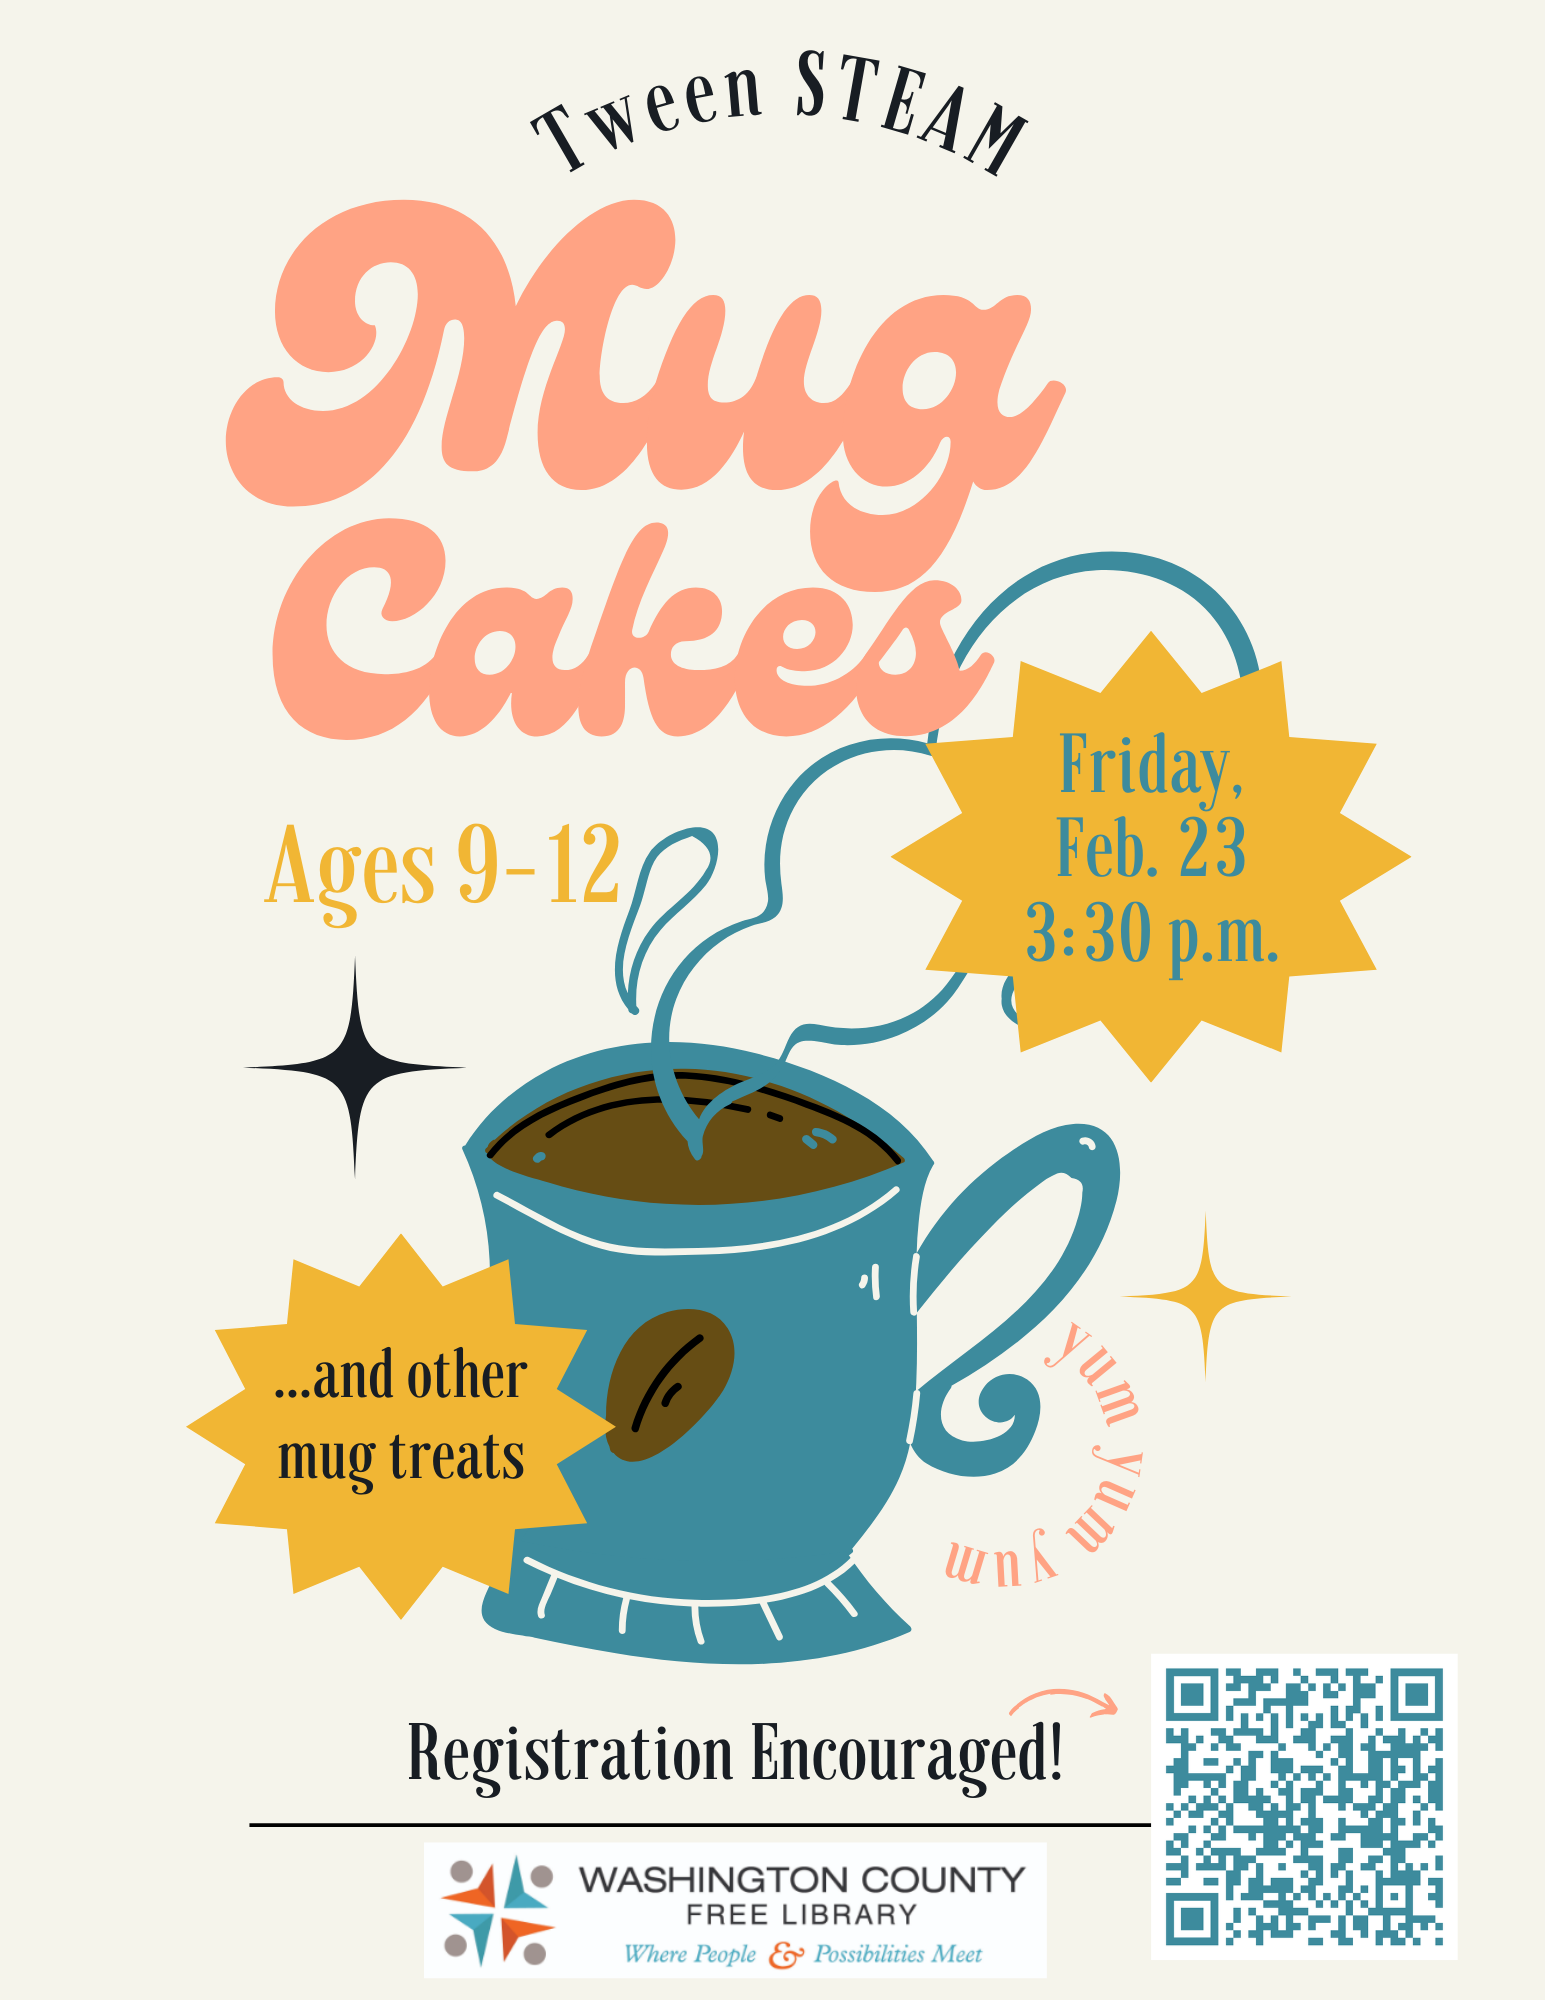 The poster has a retro cozy feel with colors in mustard yellow, salmon, and muted turqouise. There's a turquoise mug in the center with sparkles and stars flanking it. The poster contains the following information: Tween Steam Mug Cakes. Sweet treats can be science! Come learn how to make a mug cake (and maybe a few other sweet treats?) Ages 9 to 12, Friday. February 23 at 3:30 in the Storytime Room at Fletcher Branch in Hagerstown. Hope to see you there! 